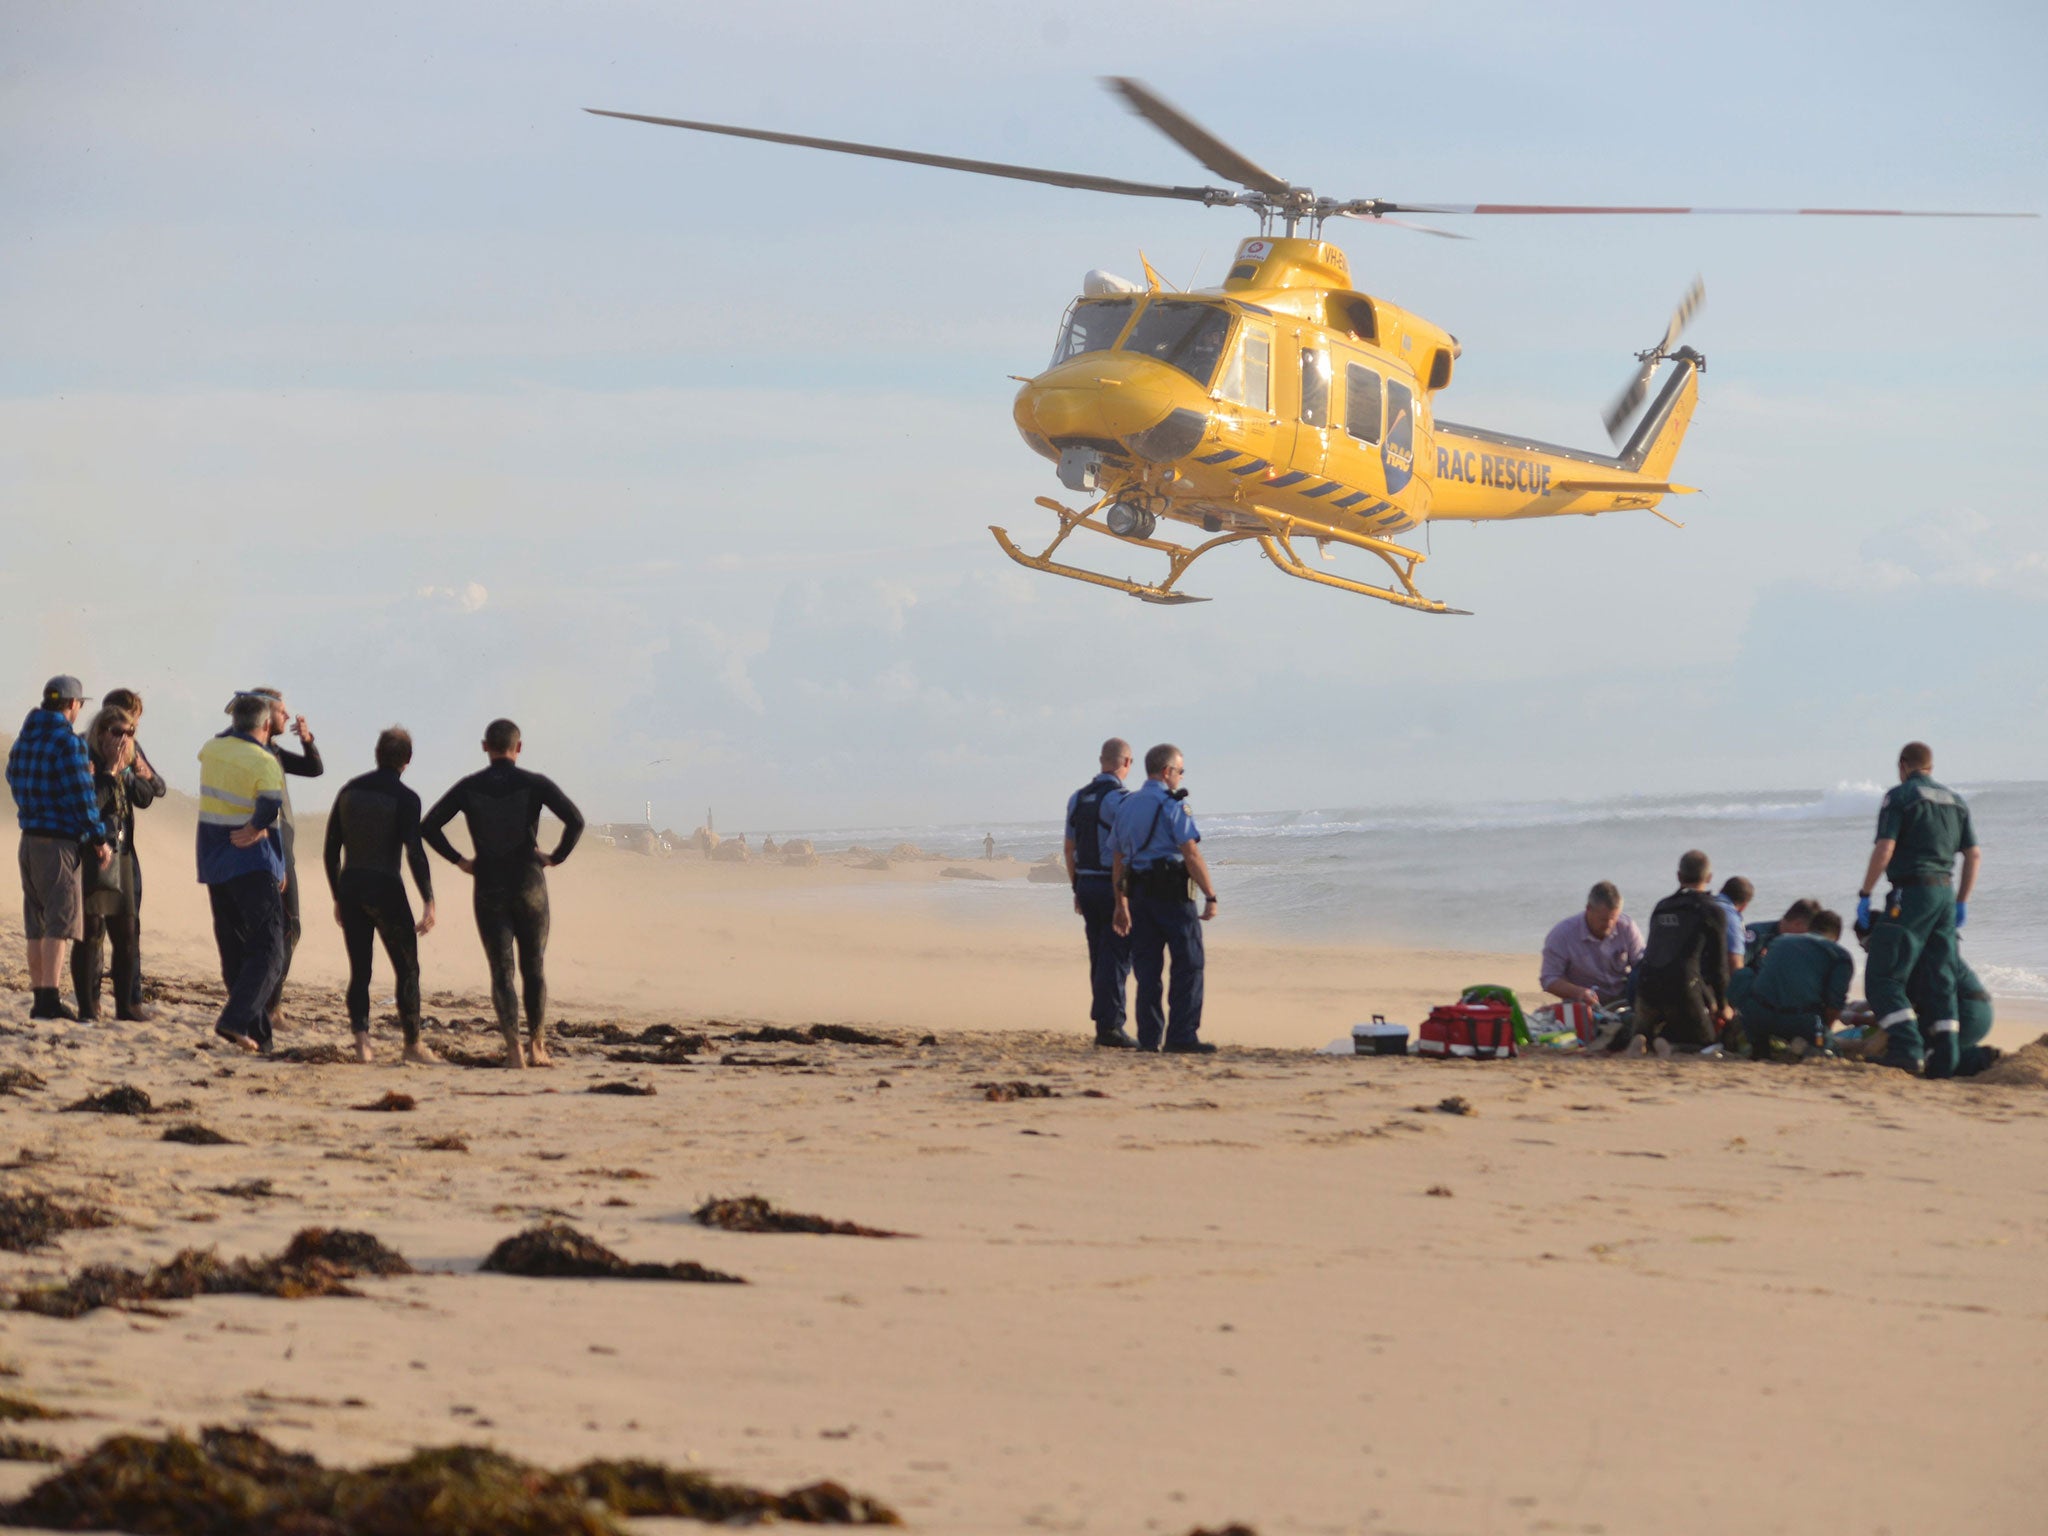 A photo taken on 31 May, 2016, shows a rescue helicopter arriving to transport a critically injured surfer